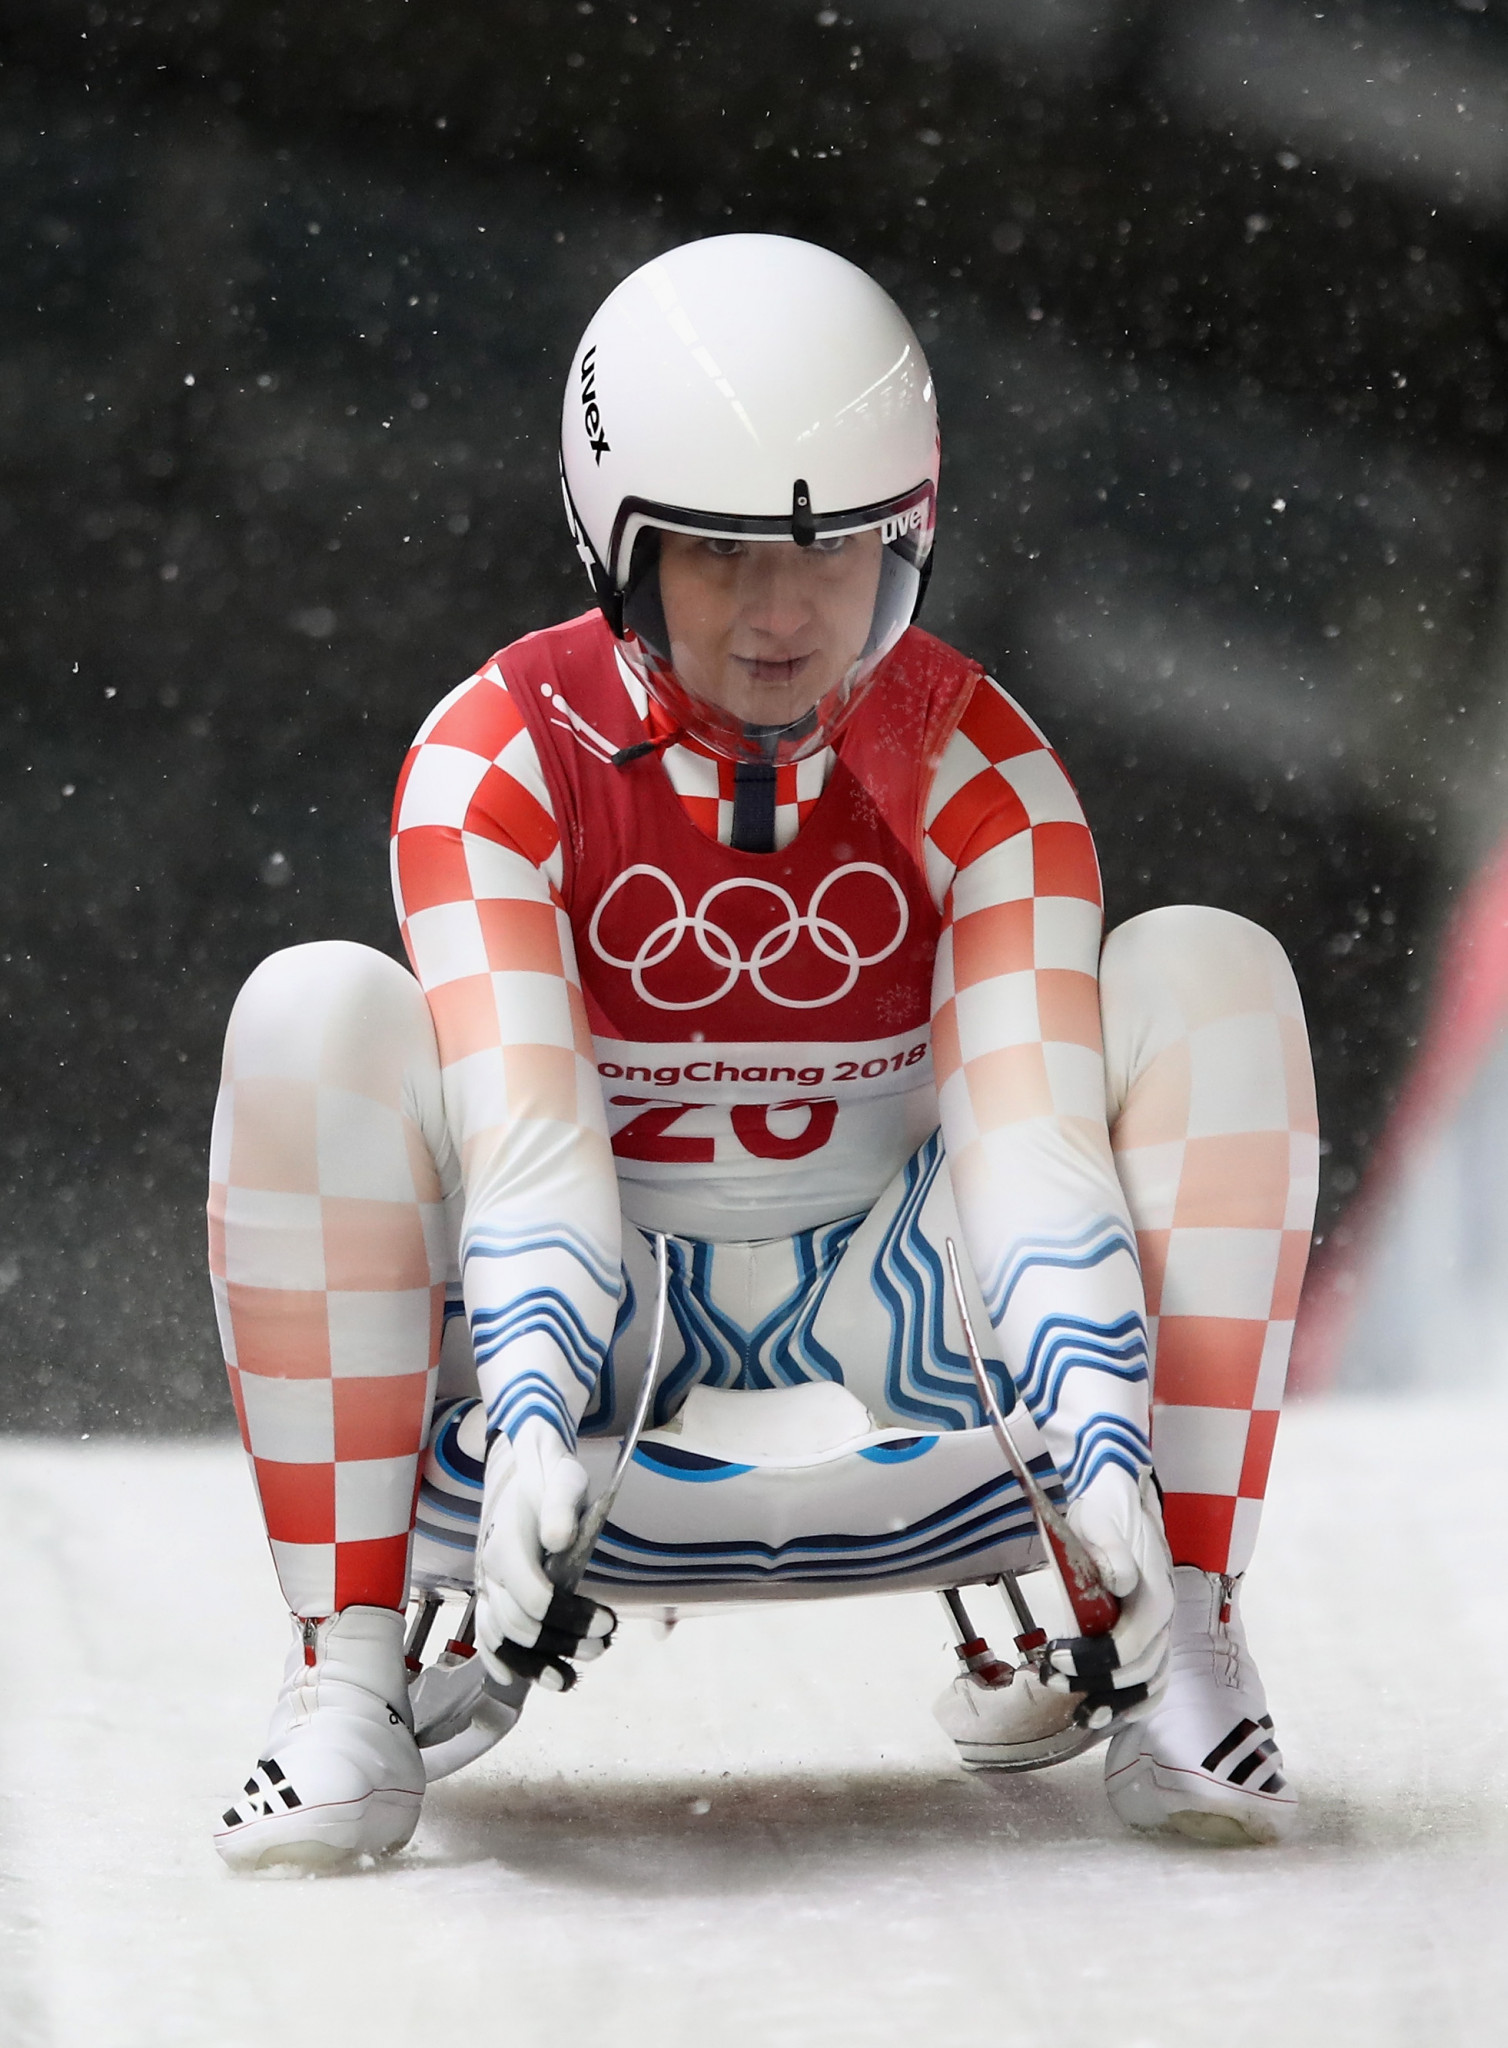 In qualifying for Pyeongchang 2018, Daria Obratov became the first athlete from Croatia to compete in Olympic luge ©Getty Images